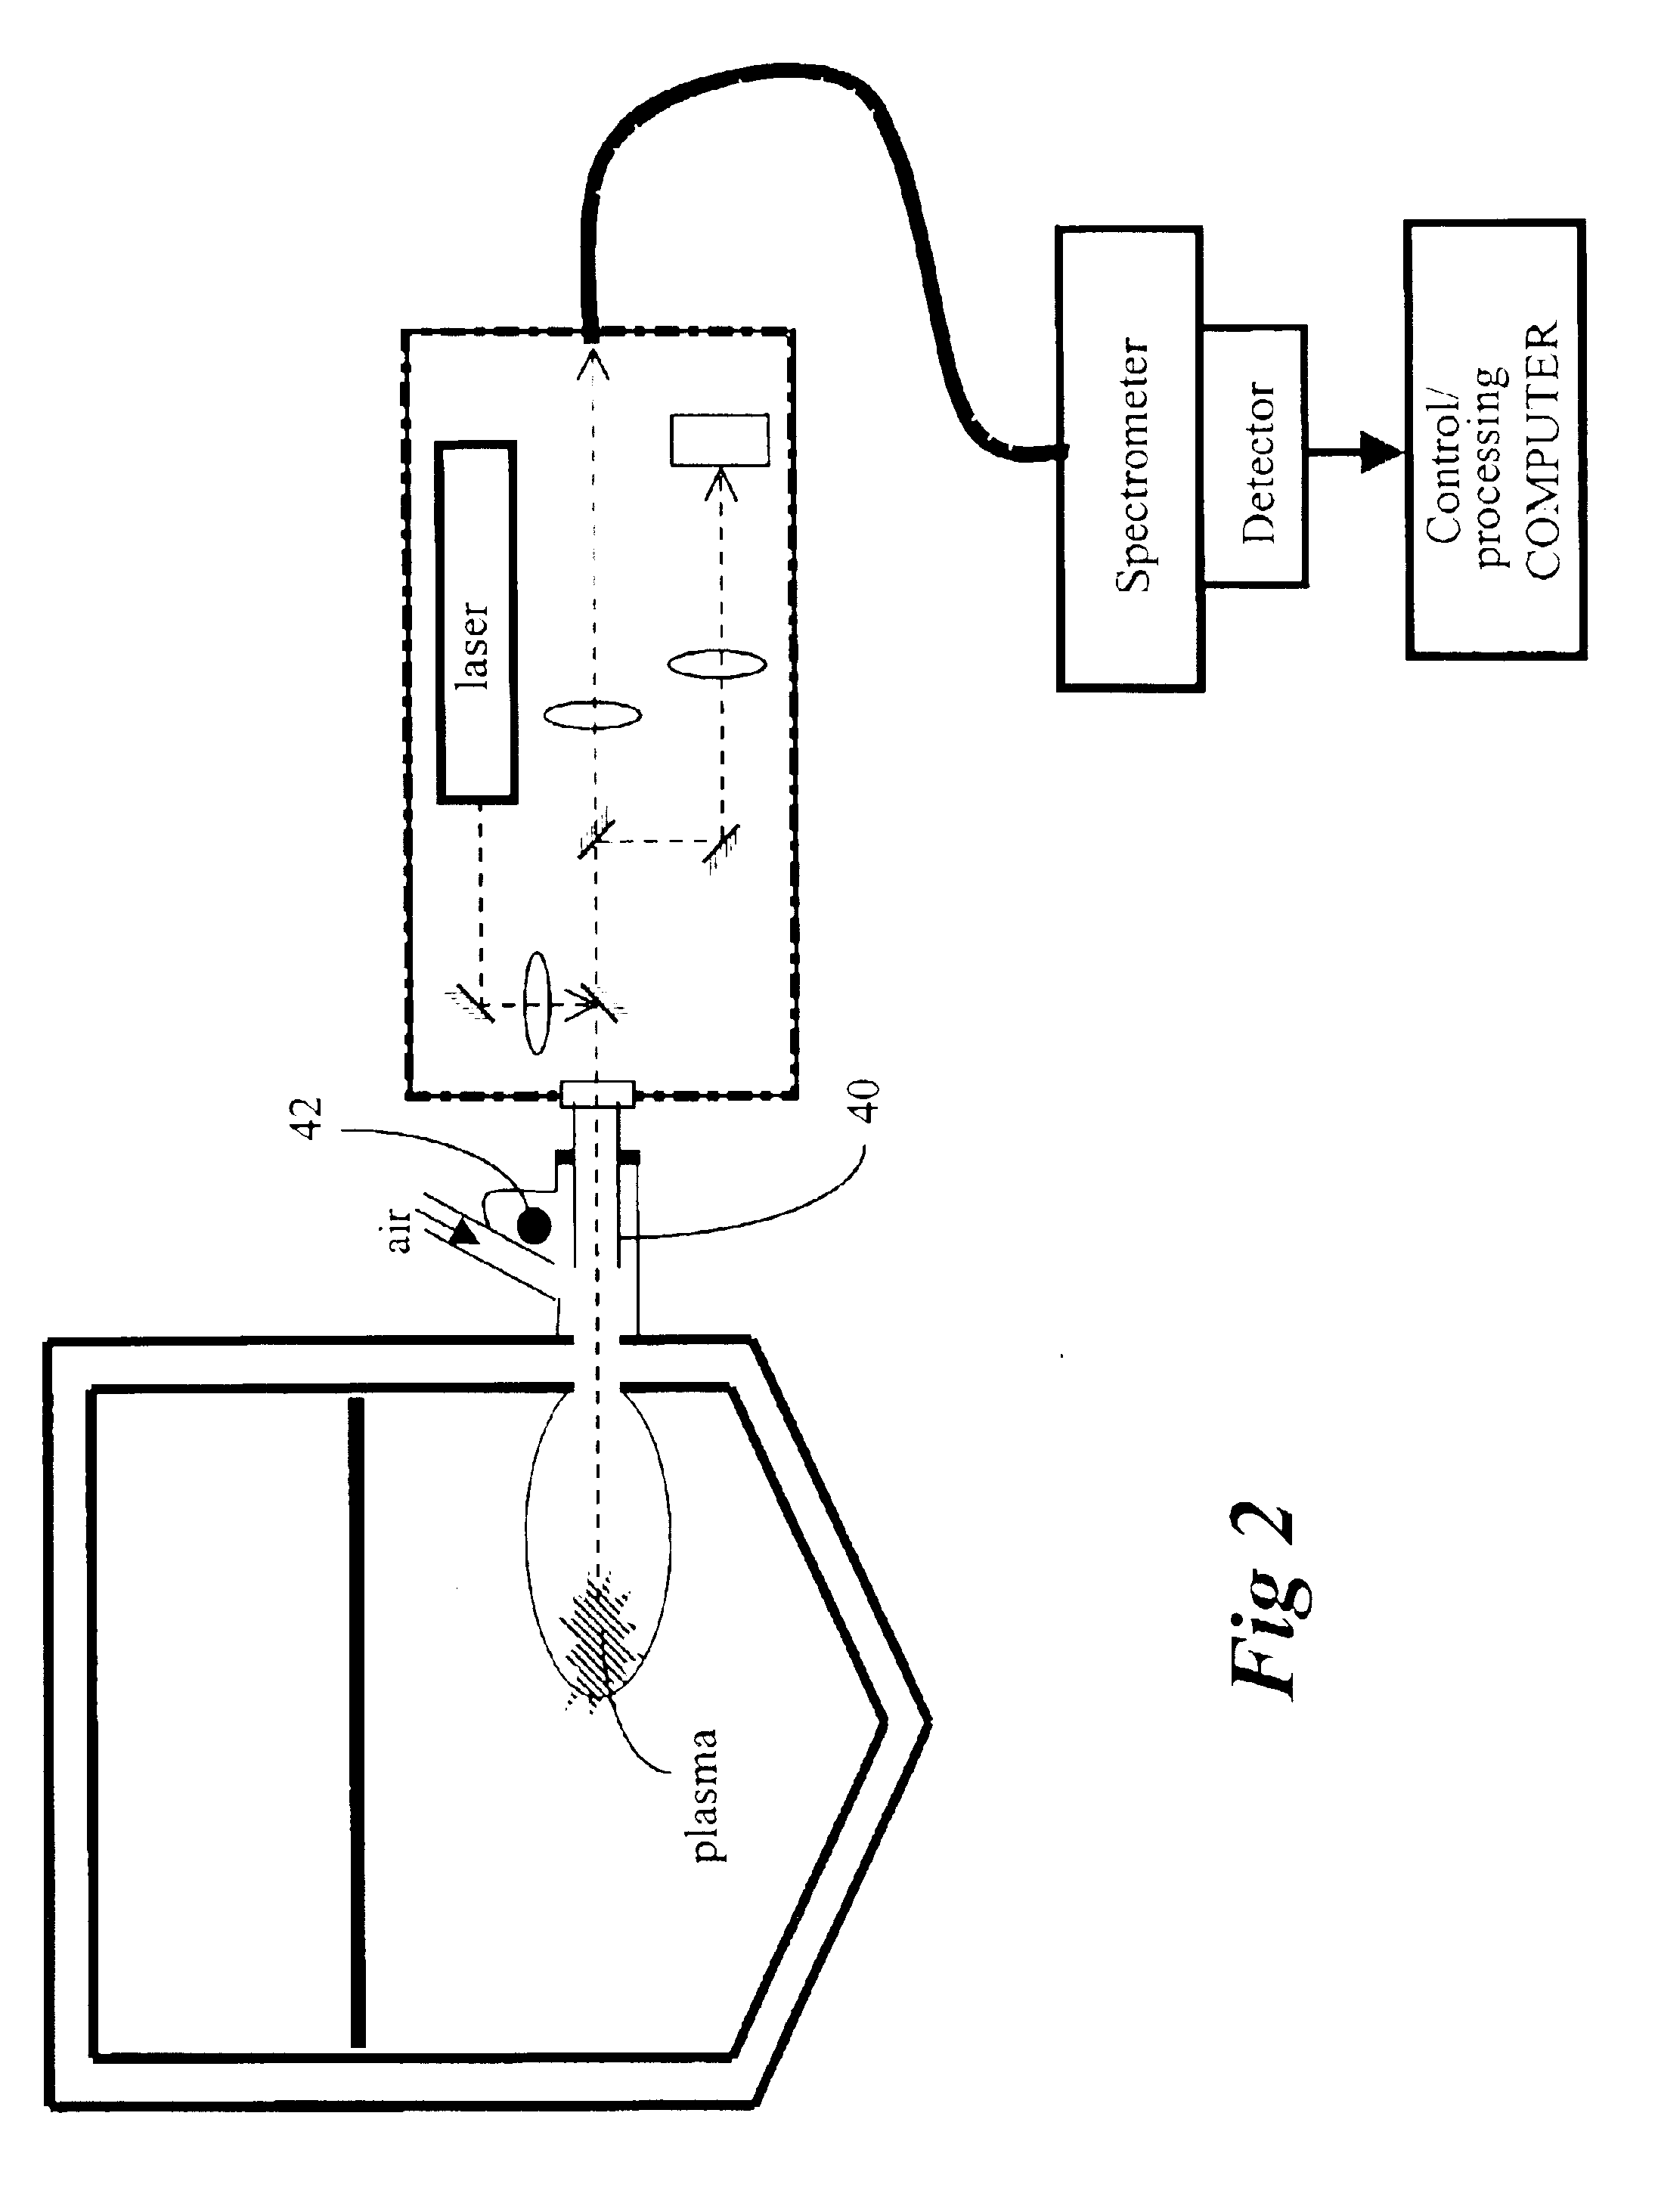 Method and apparatus for molten material analysis by laser induced breakdown spectroscopy